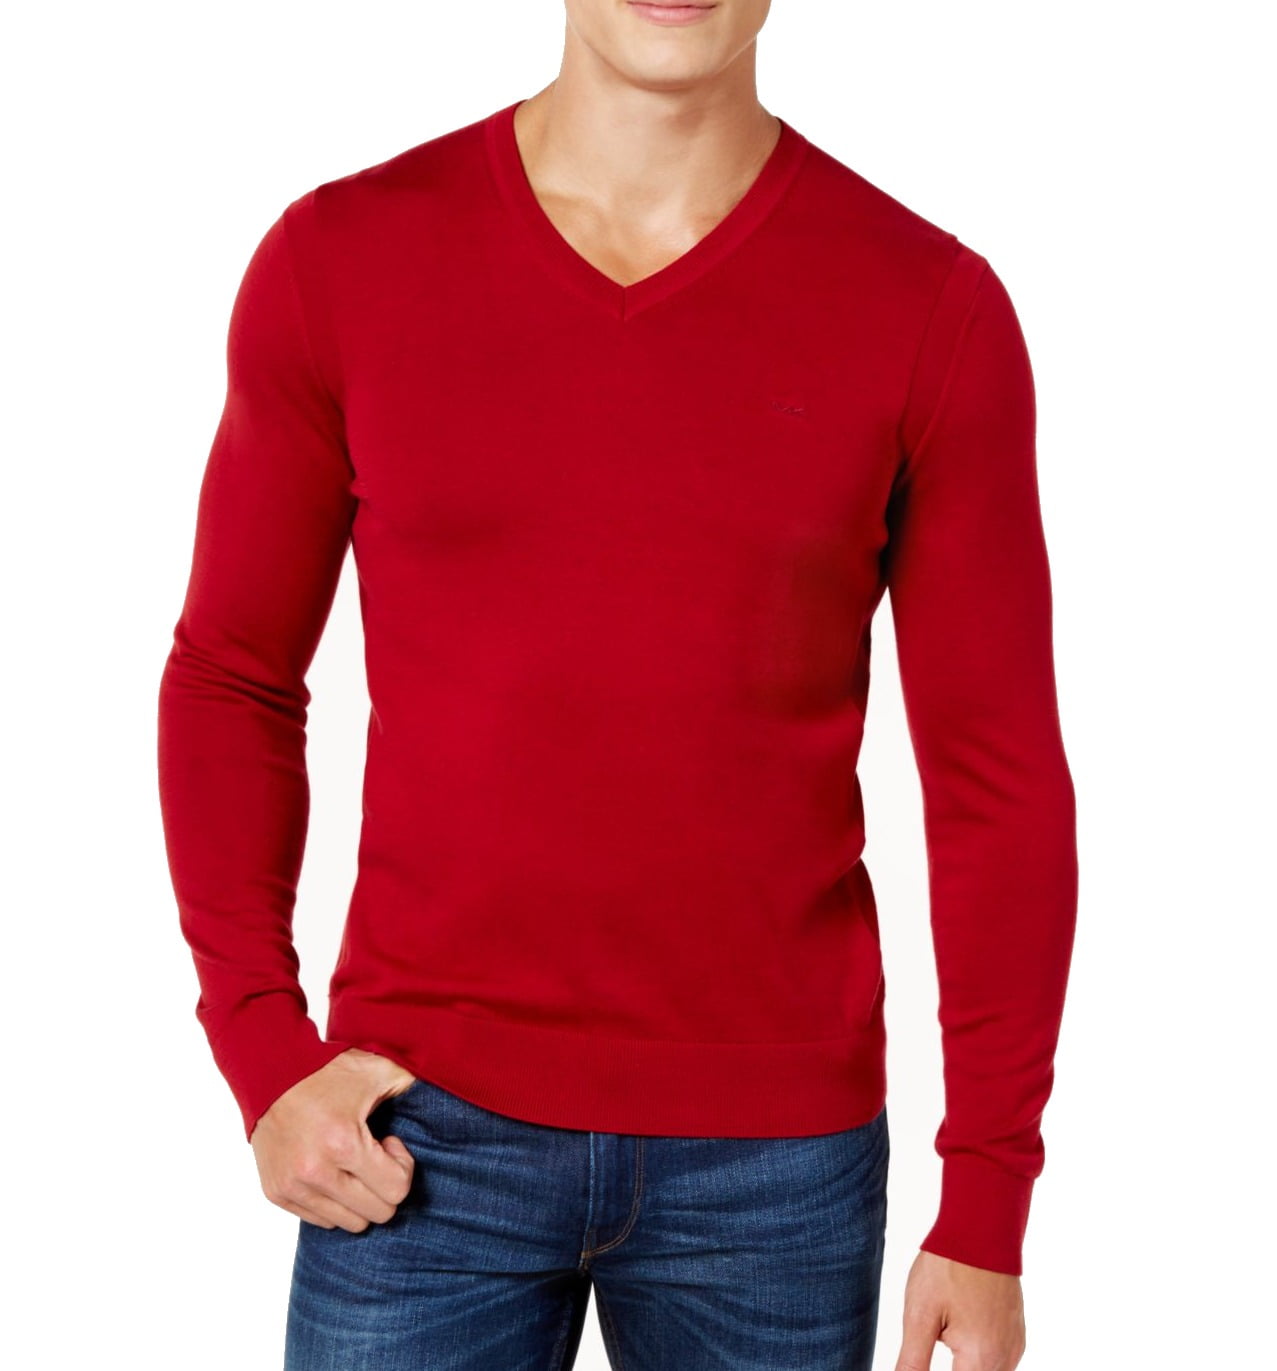 Michael Kors - Mens Sweater Ruby Red V-Neck Stretch Knit Pullover $89 ...